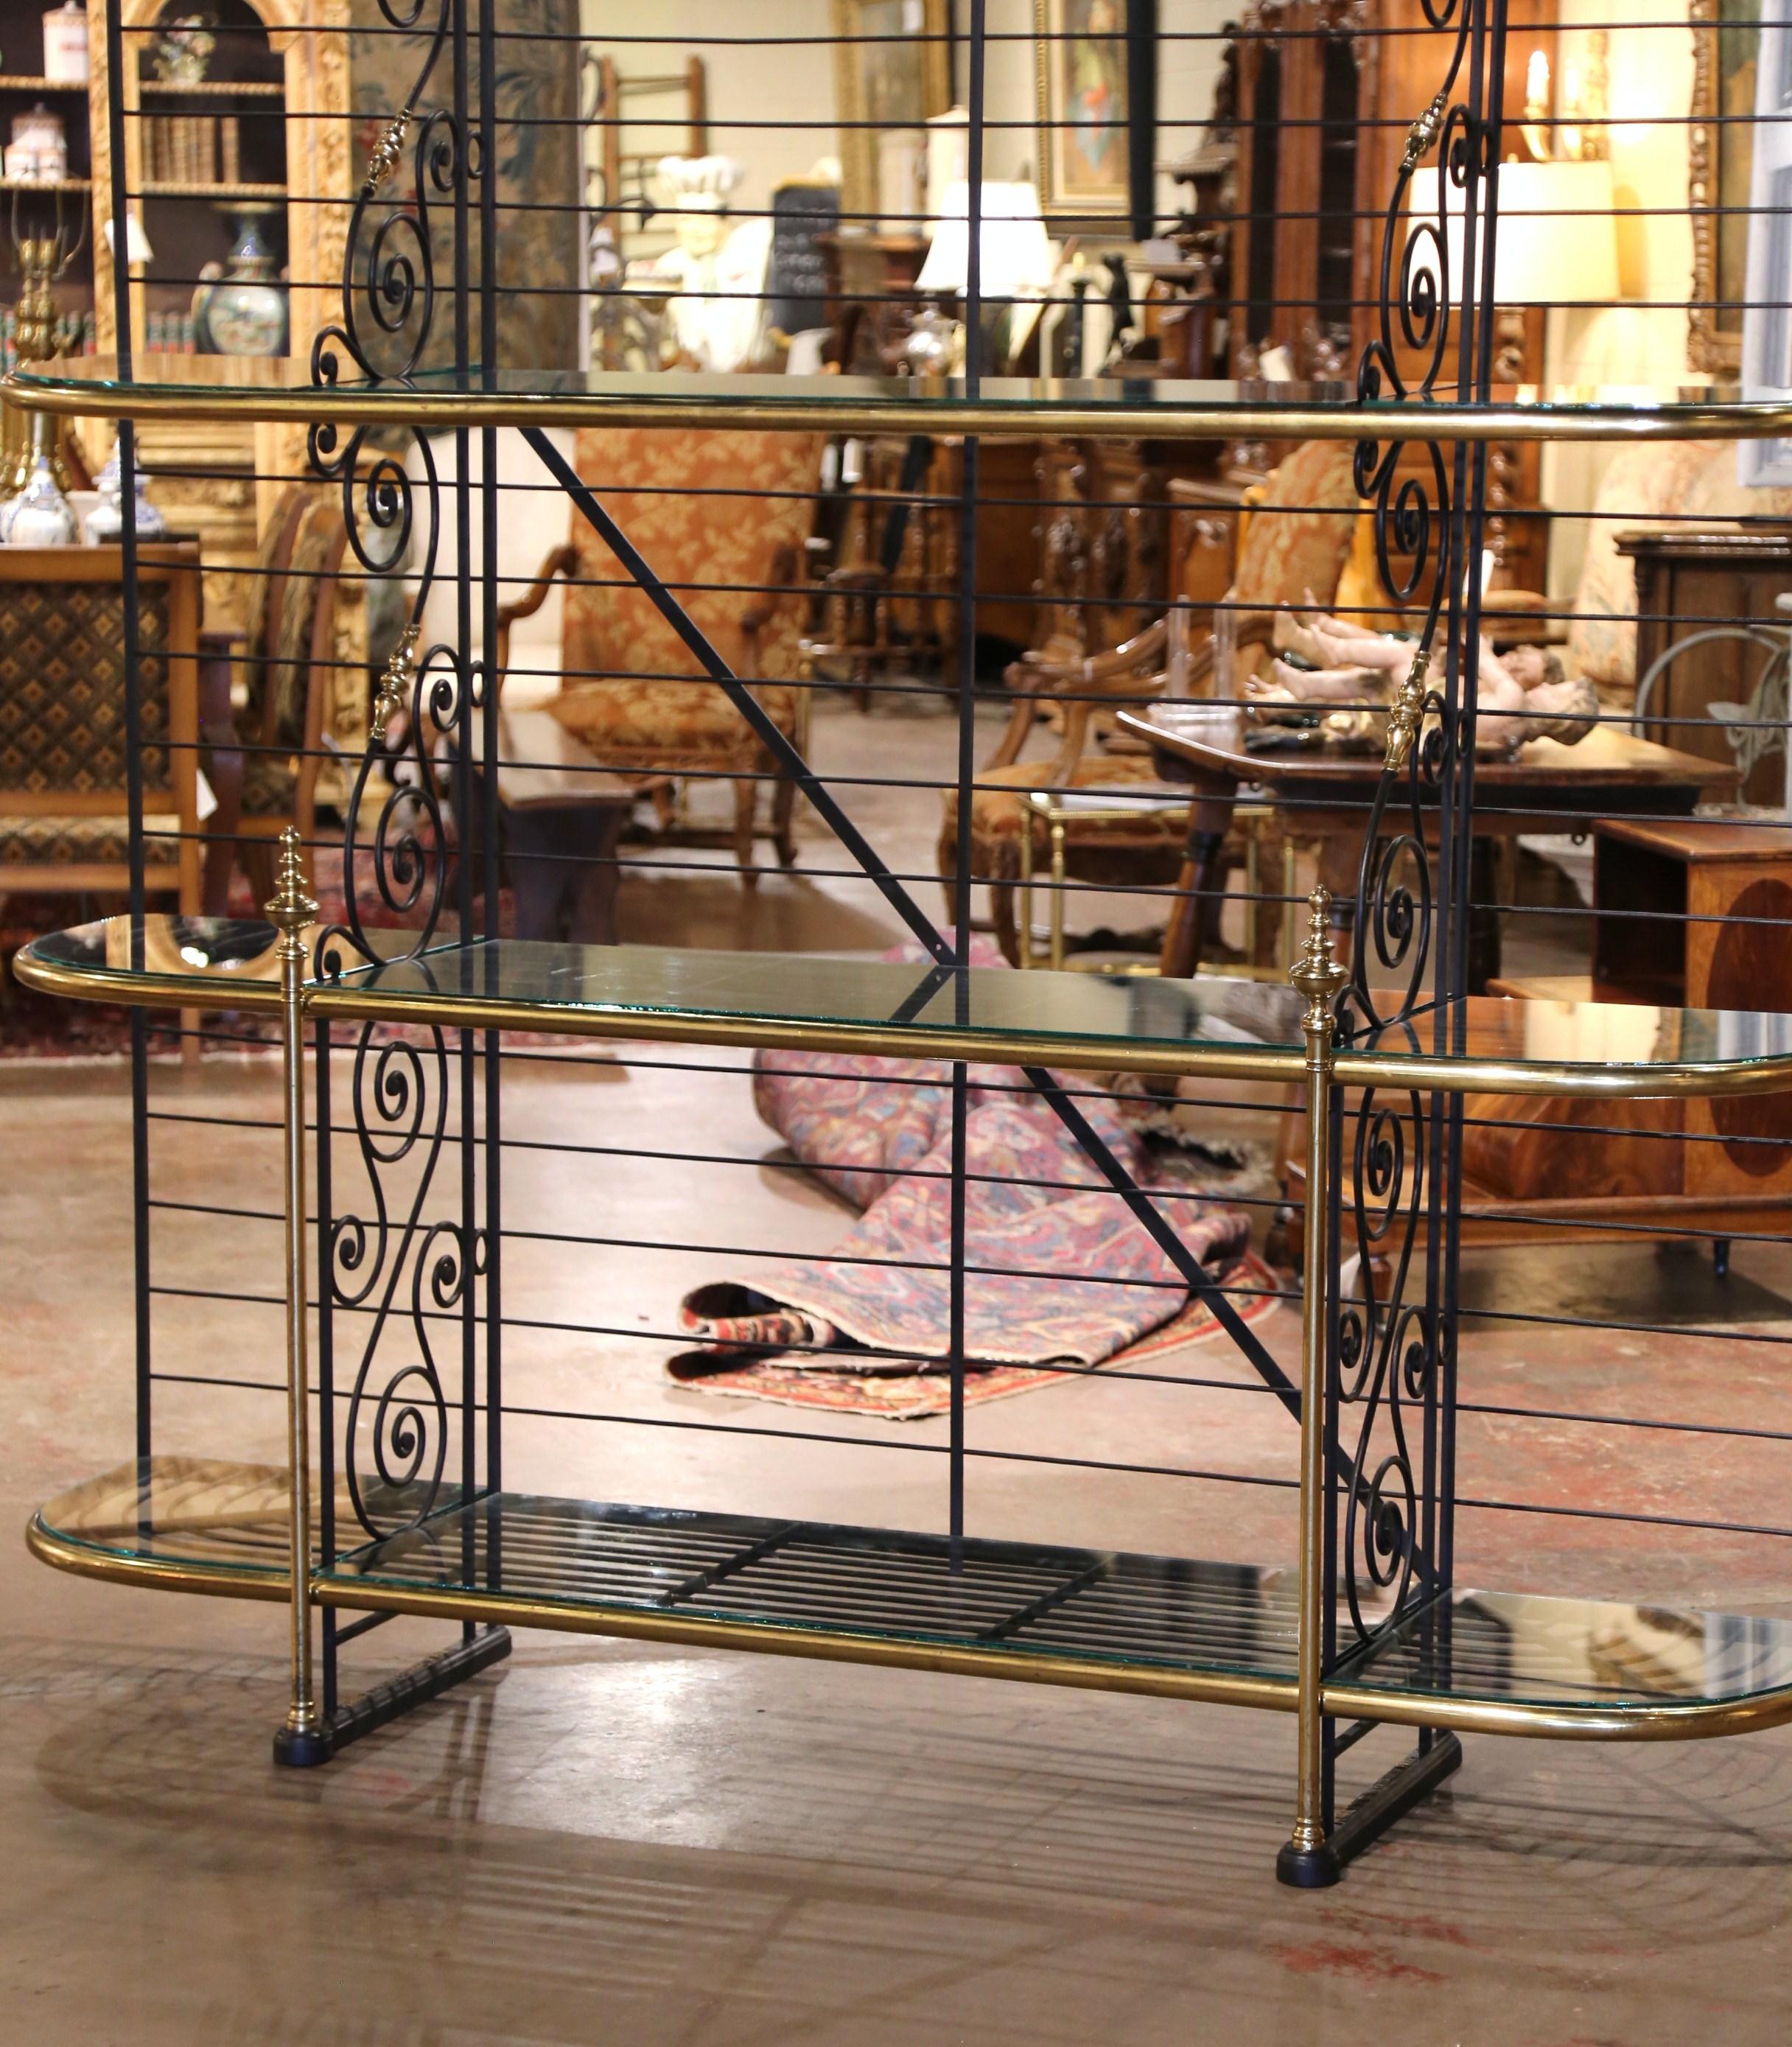 Display your Majolica collection, cooking books, glass ware or other accessories on this elegant antique Parisian 